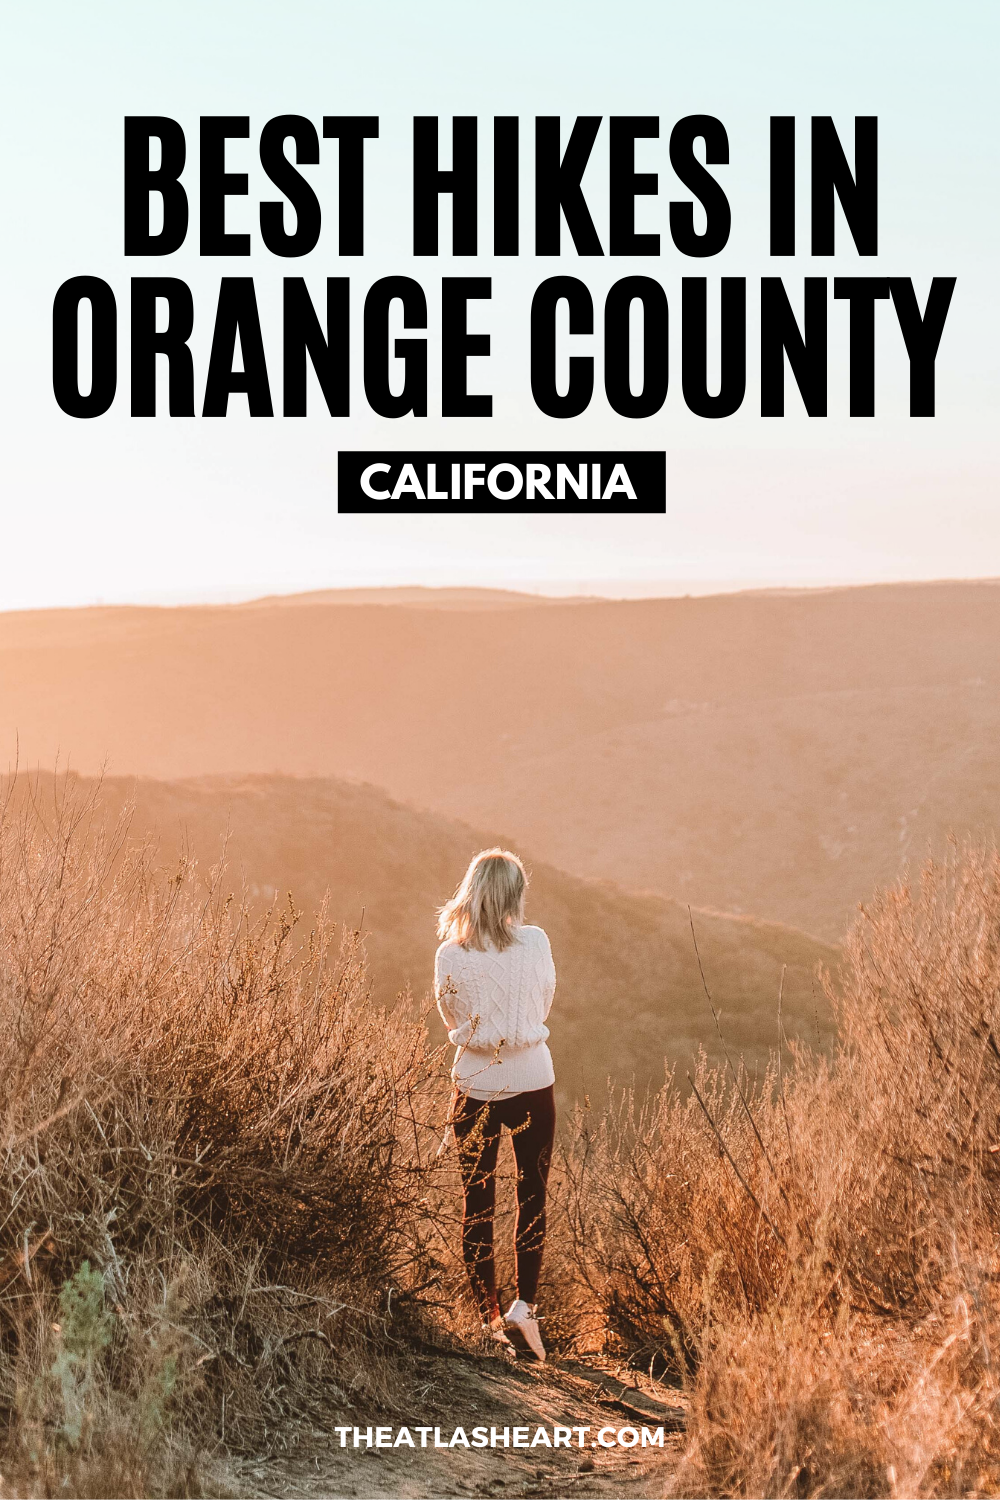 15 Best Hikes in Orange County, California (Where to Hit the Trail)